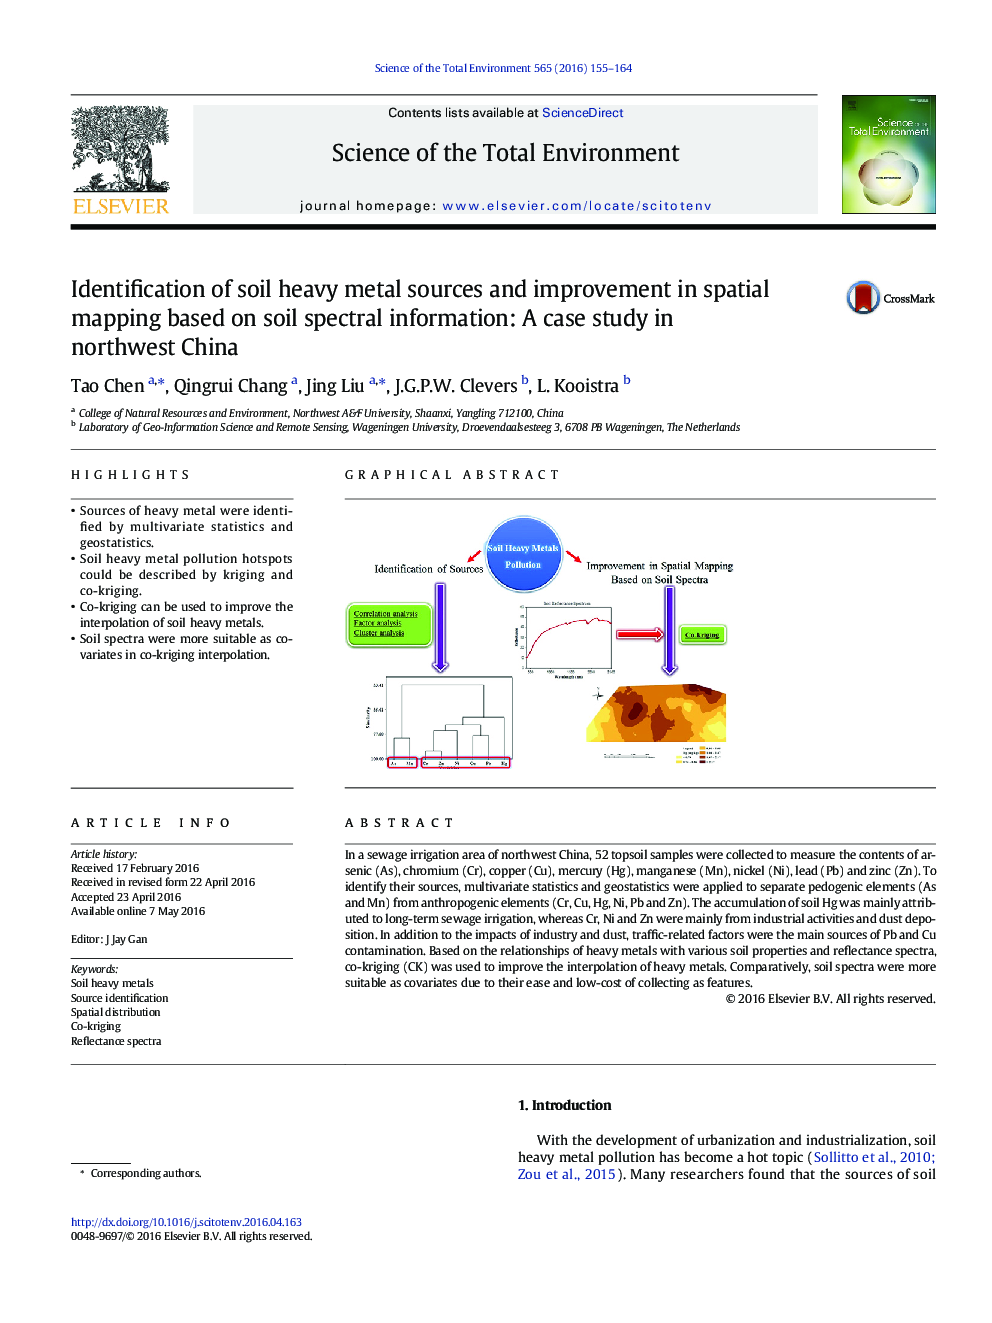 Identification of soil heavy metal sources and improvement in spatial mapping based on soil spectral information: A case study in northwest China